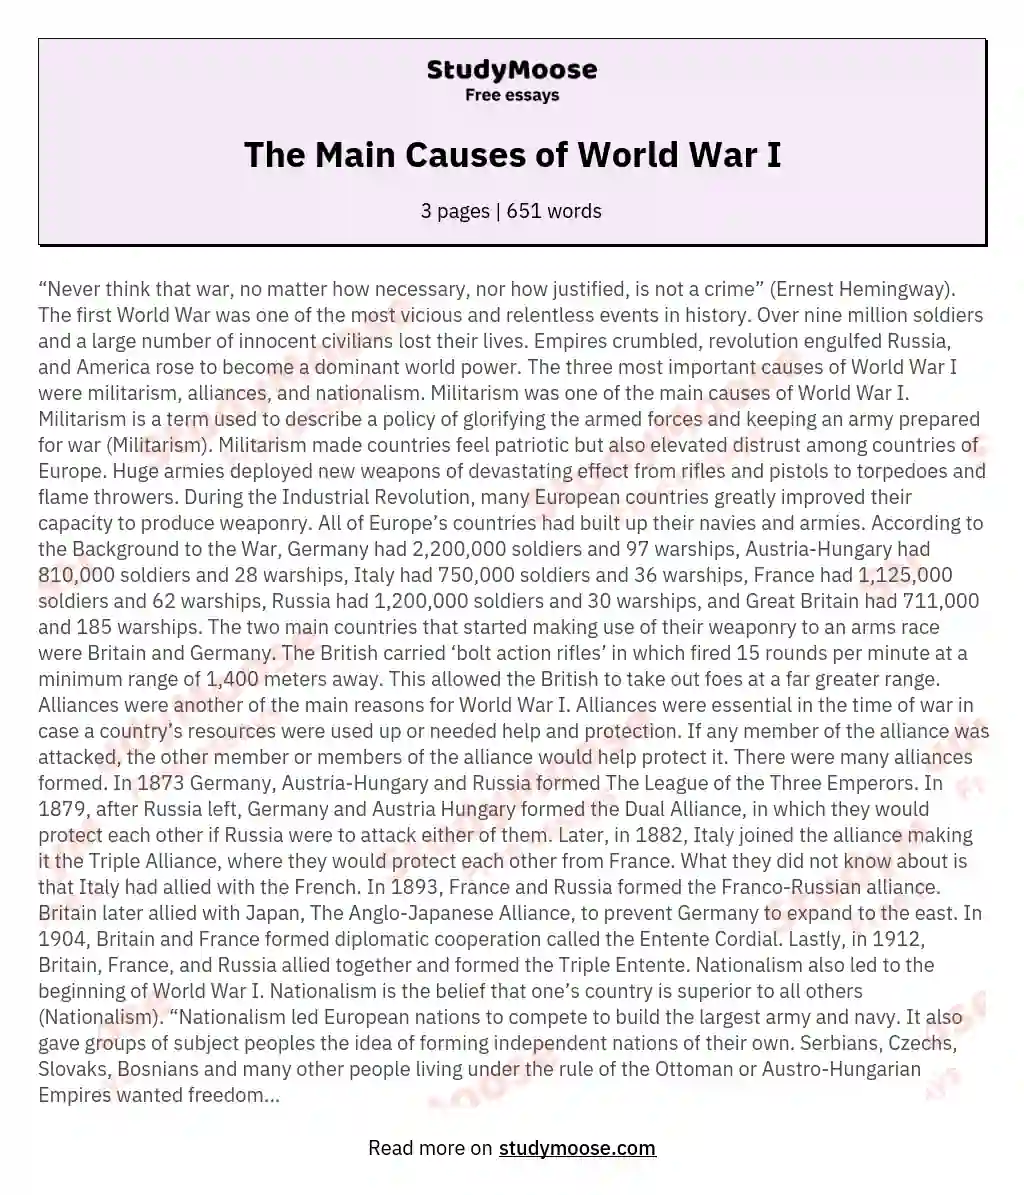 The Main Causes of World War I essay